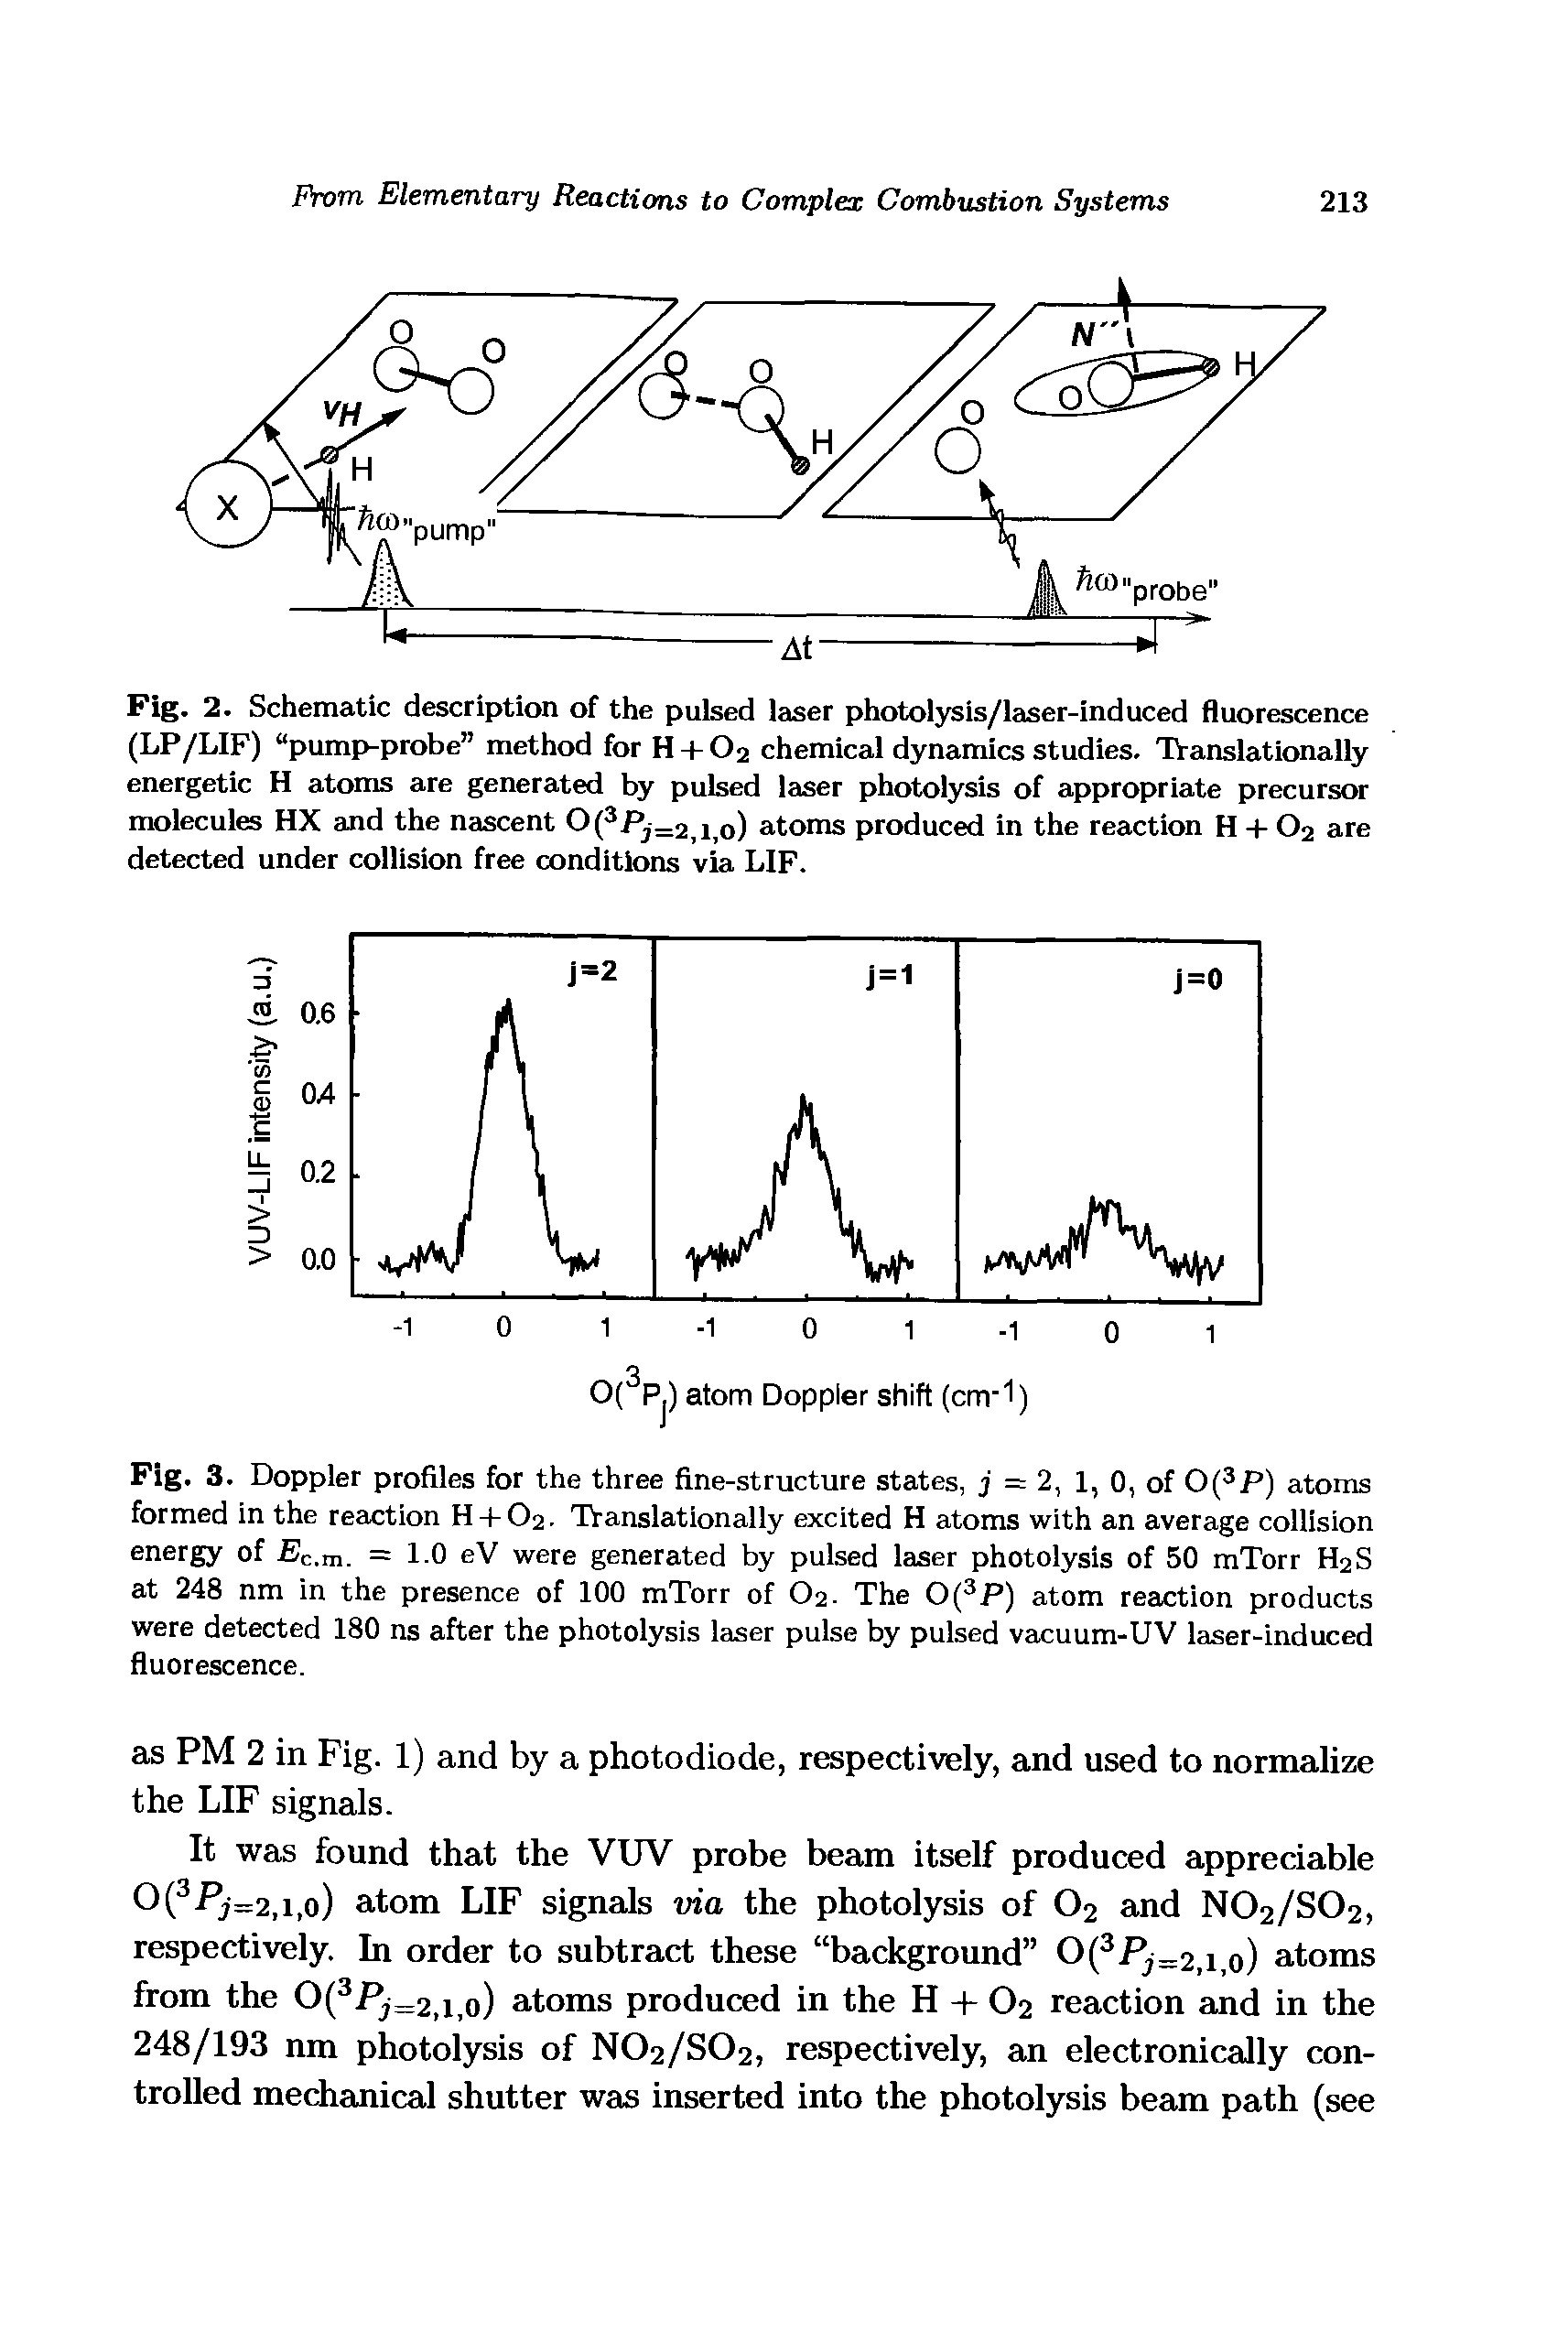 Fig. 2. Schematic description of the pulsed laser photolysis/laser-induced fluorescence (LP/LIF) pump-probe method for H-I-O2 chemical dynamics studies. TVanslationally energetic H atoms are generated by pulsed laser photolysis of appropriate precursor molecules HX and the nascent 0( Pj 2 i o) atoms produced in the reaction H -I- O2 are detected under collision free conditions via LIF.